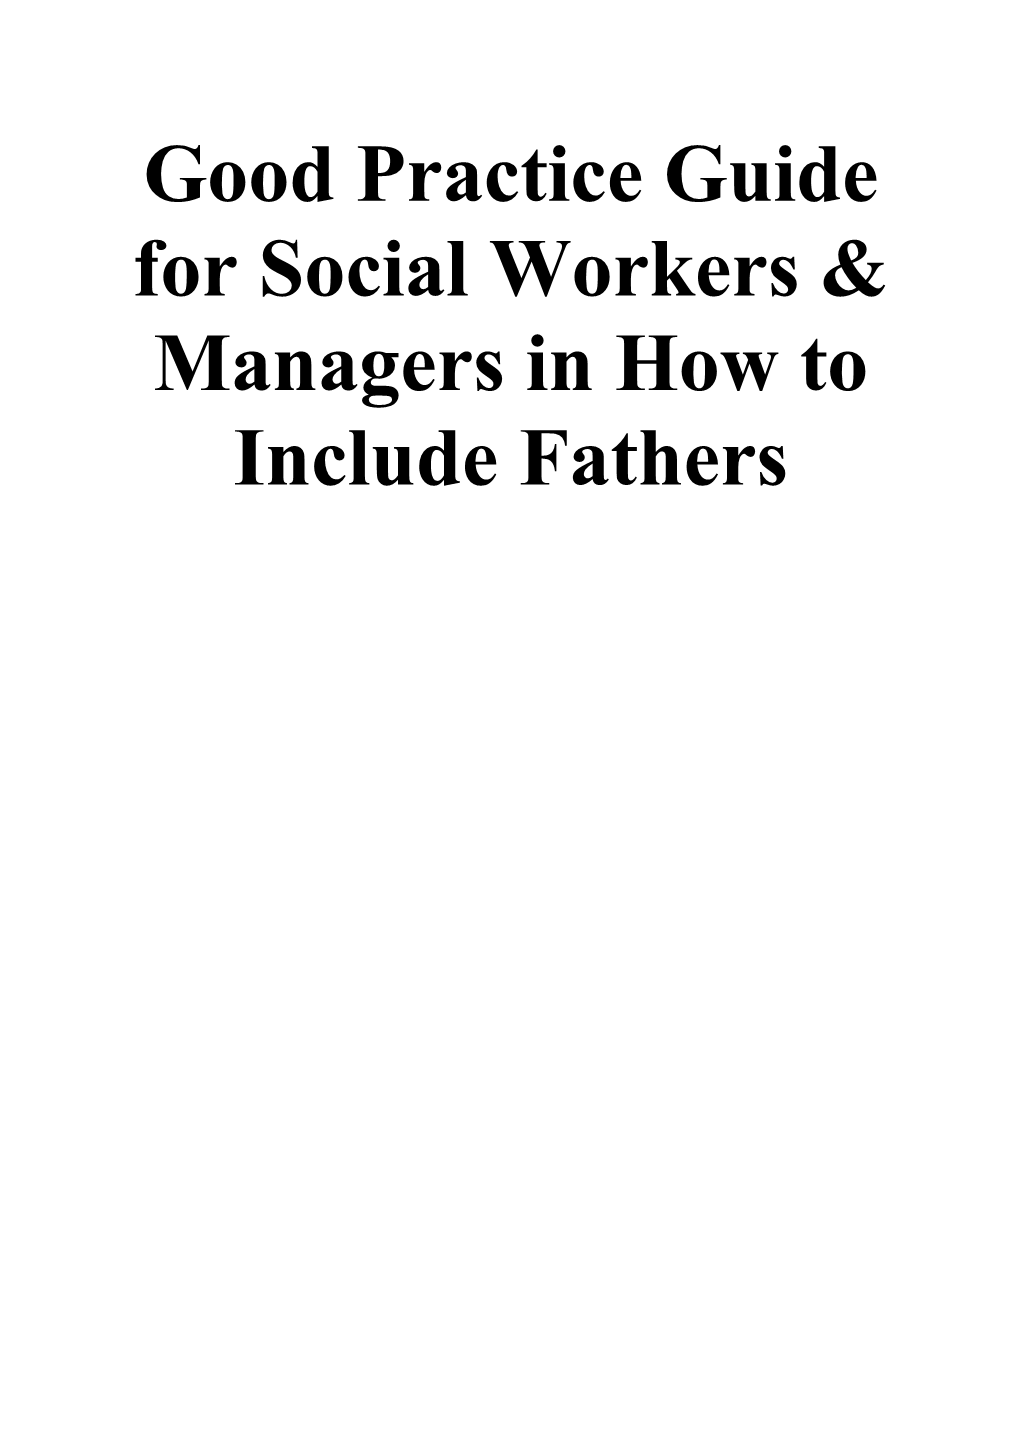 Good Practice Guide for Social Workers & Managers in How to Include Fathers